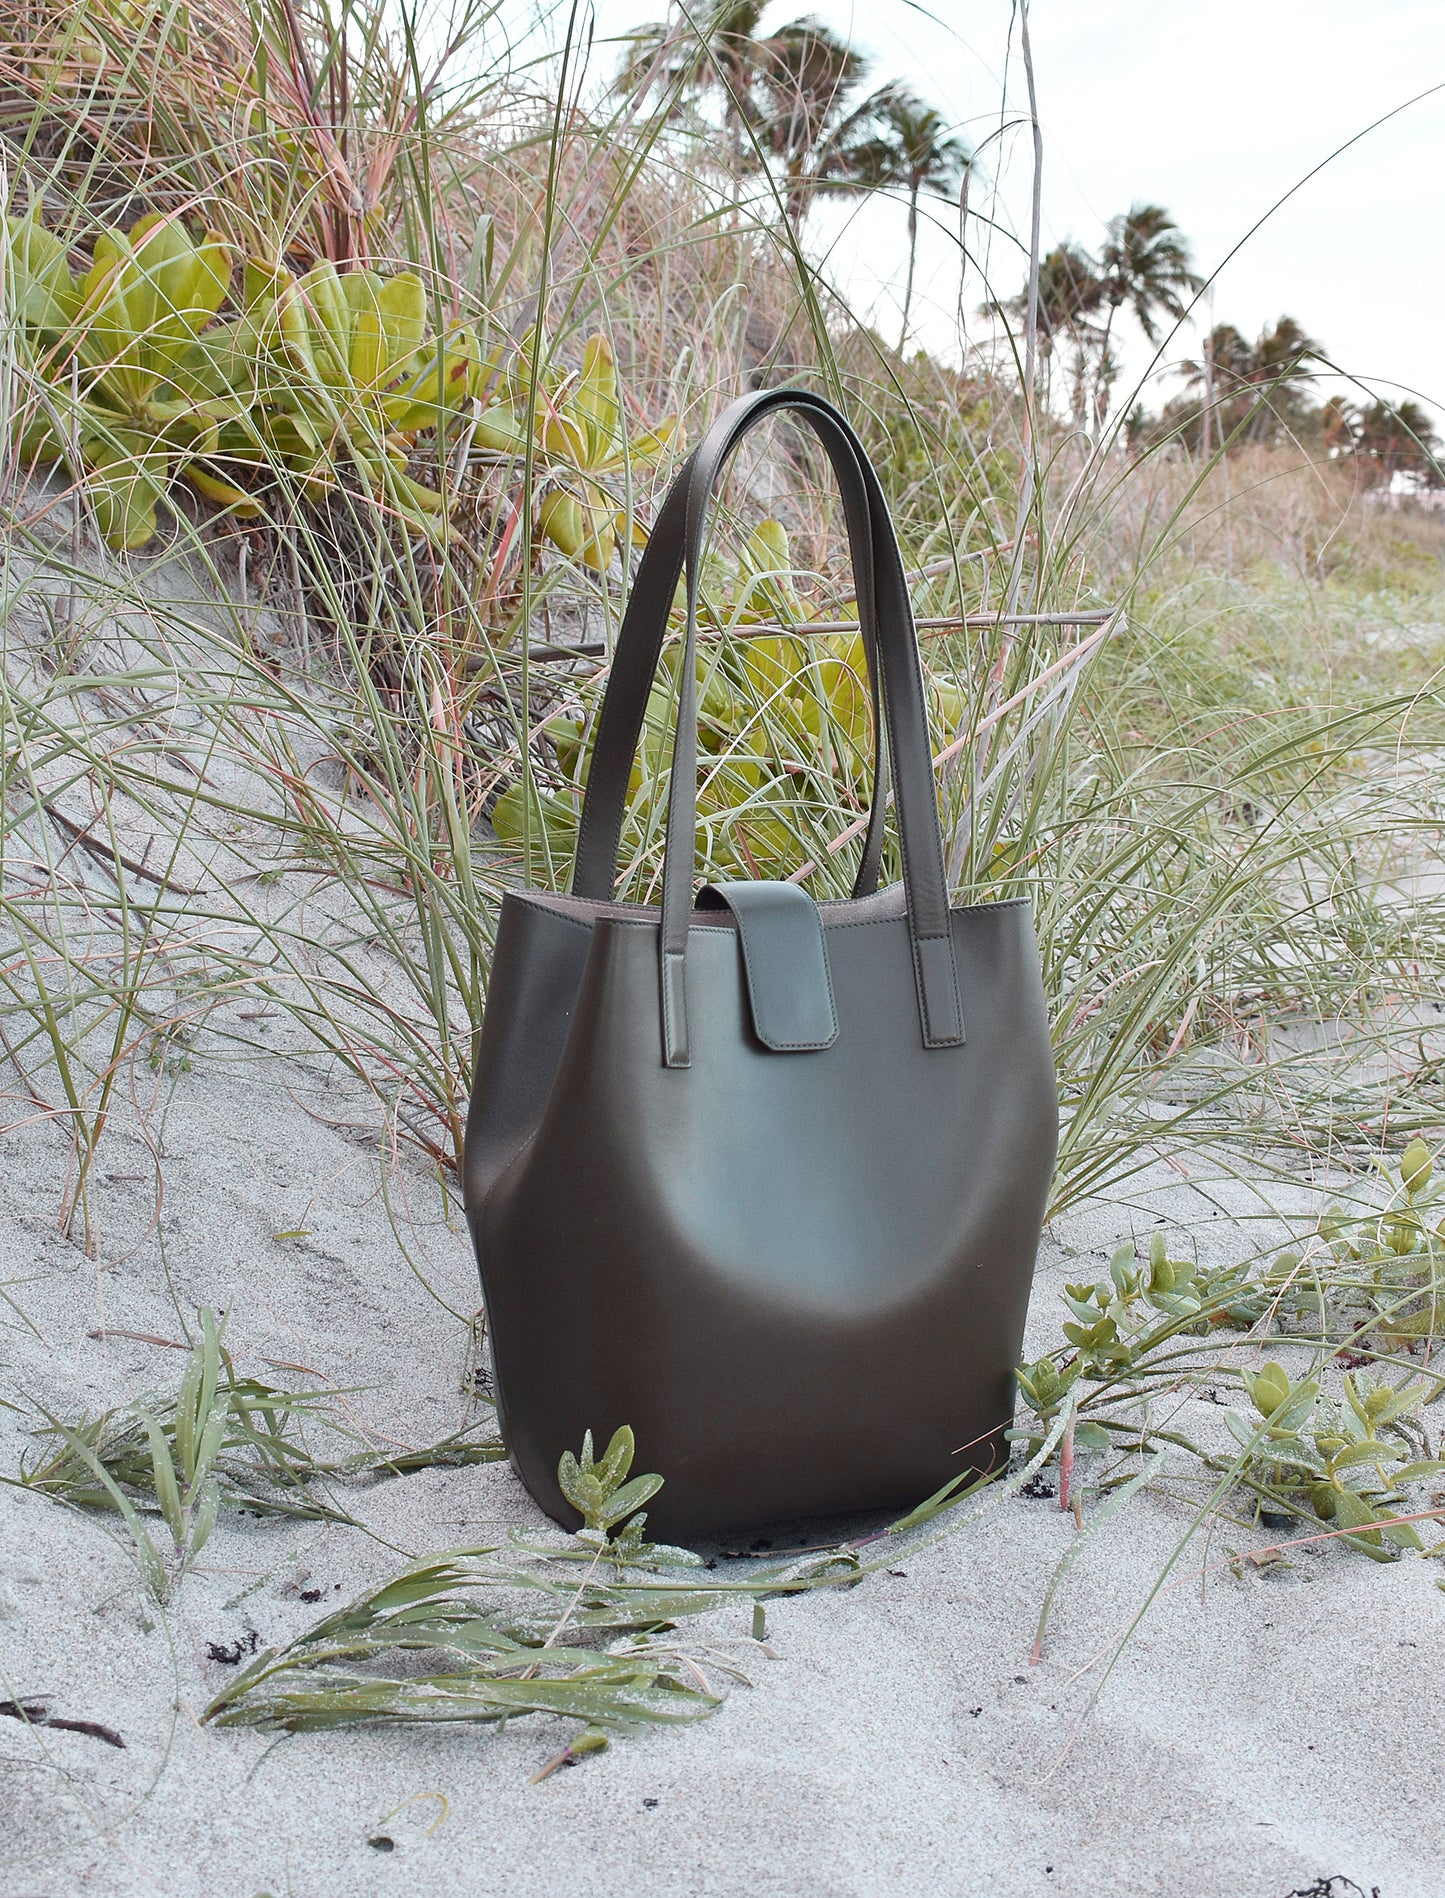 Olive green luxury bag Made in Italy Supports the Environment Minimalist Style Shoulder Bag in the Dunes in West Palm Beach